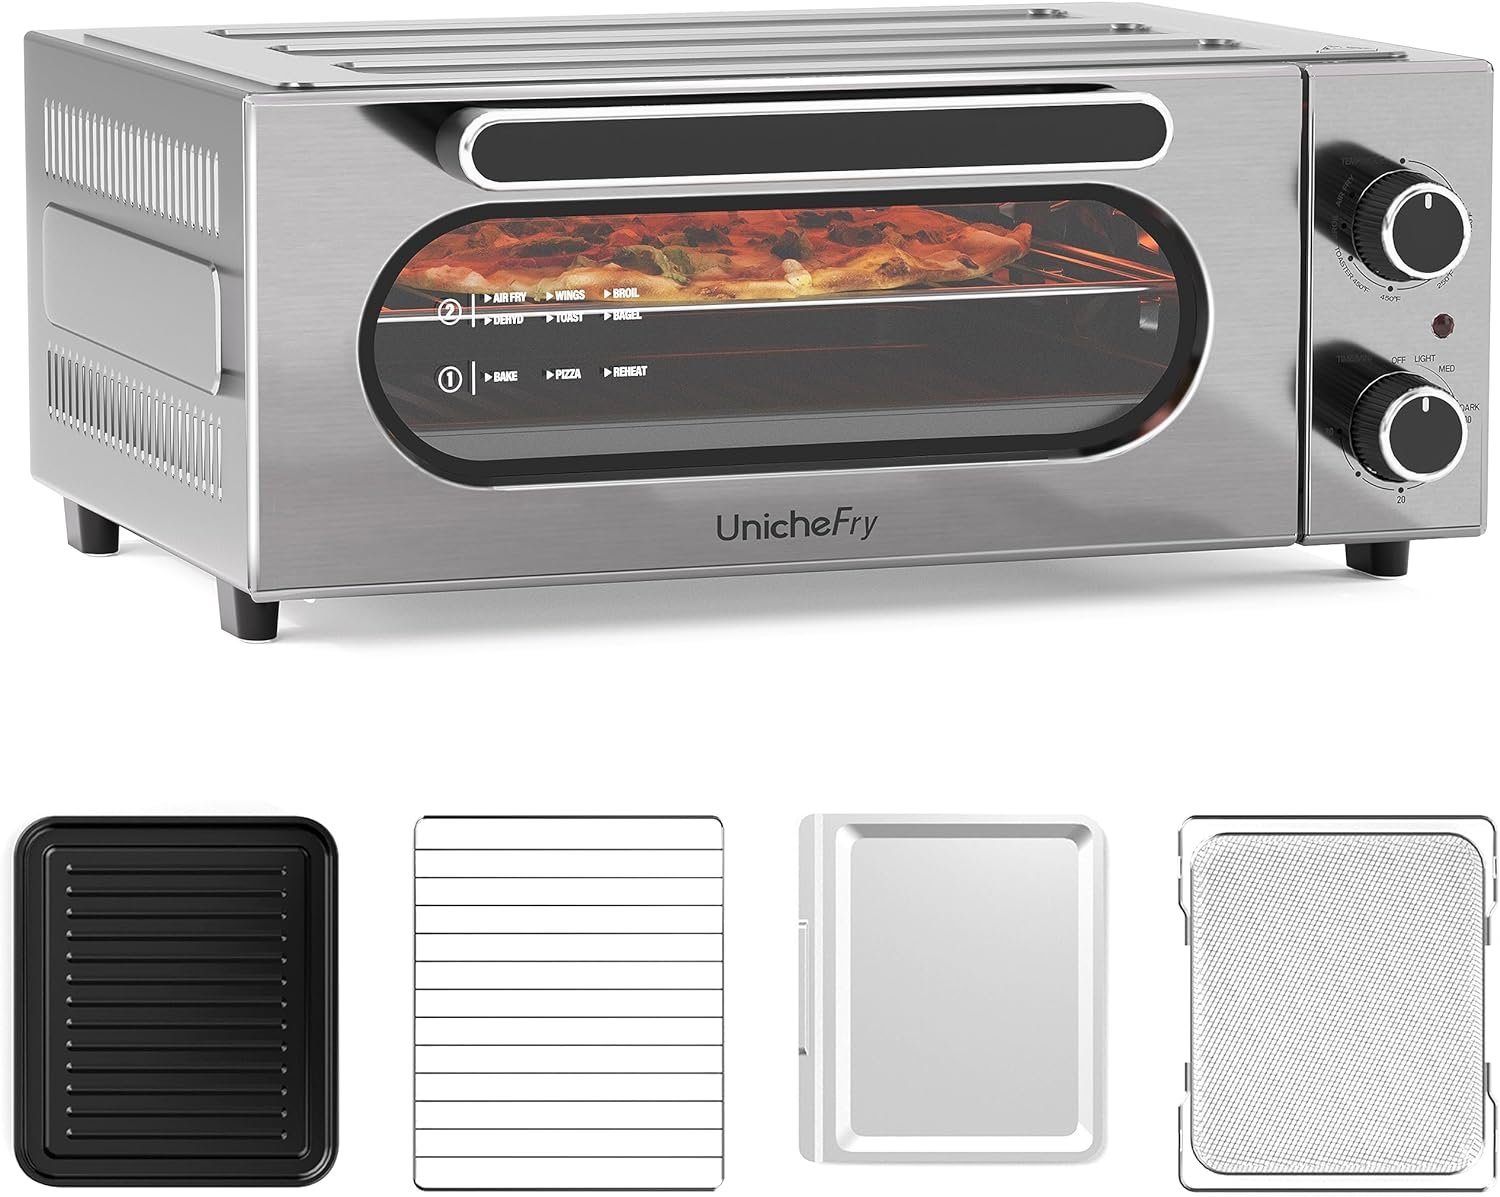 16QT Air Fryer Toaster Oven Combo 1800W, Unichefry Countertop Convection Oven Including Toaster, Broil, Air Fry,Timer/Auto Shutoff, 150°-450°F Temp Controls, 15L Capacity, Fit 9 Slices or 12 Pizza